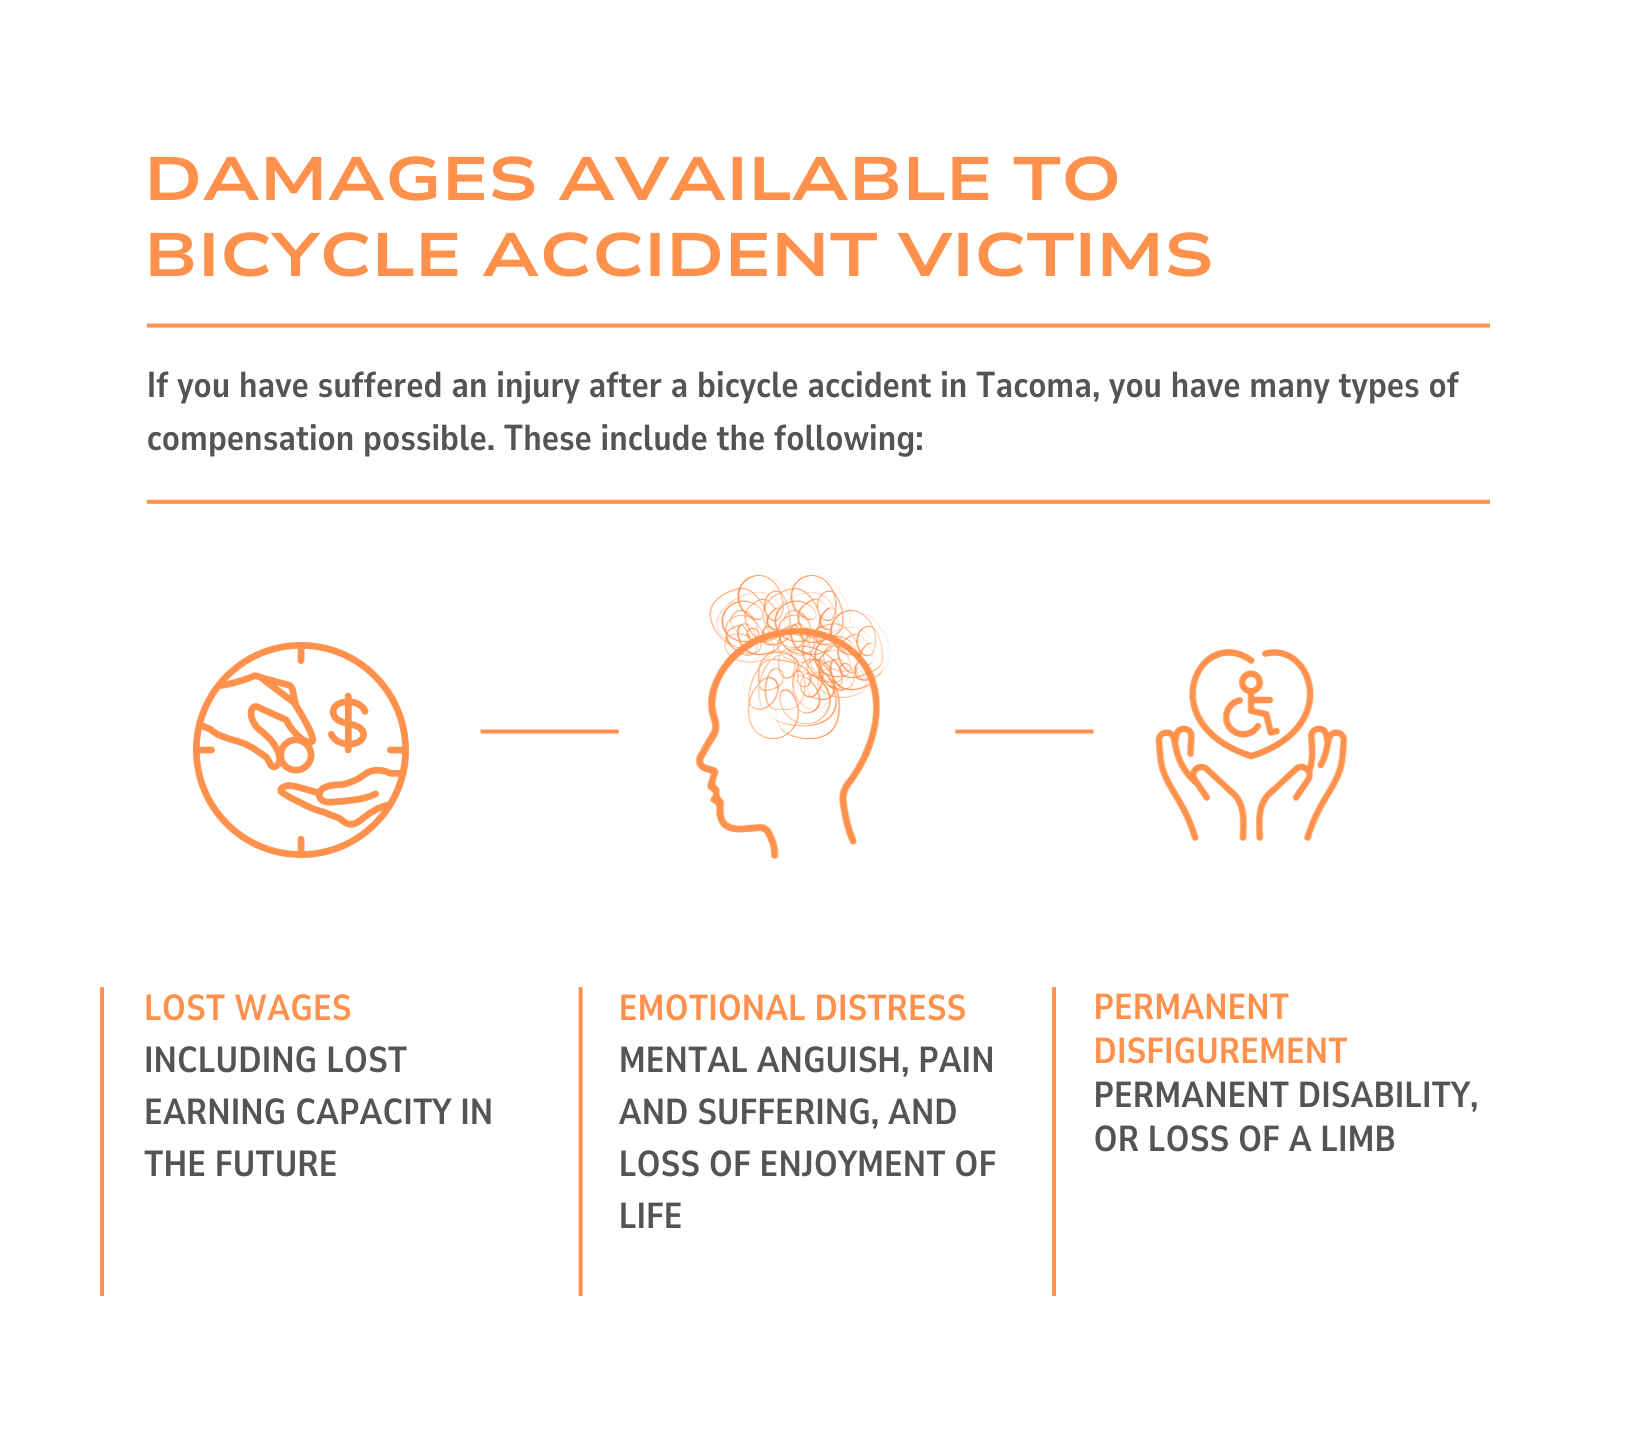 Damages Available to Bicycle Accident Victims Infographic